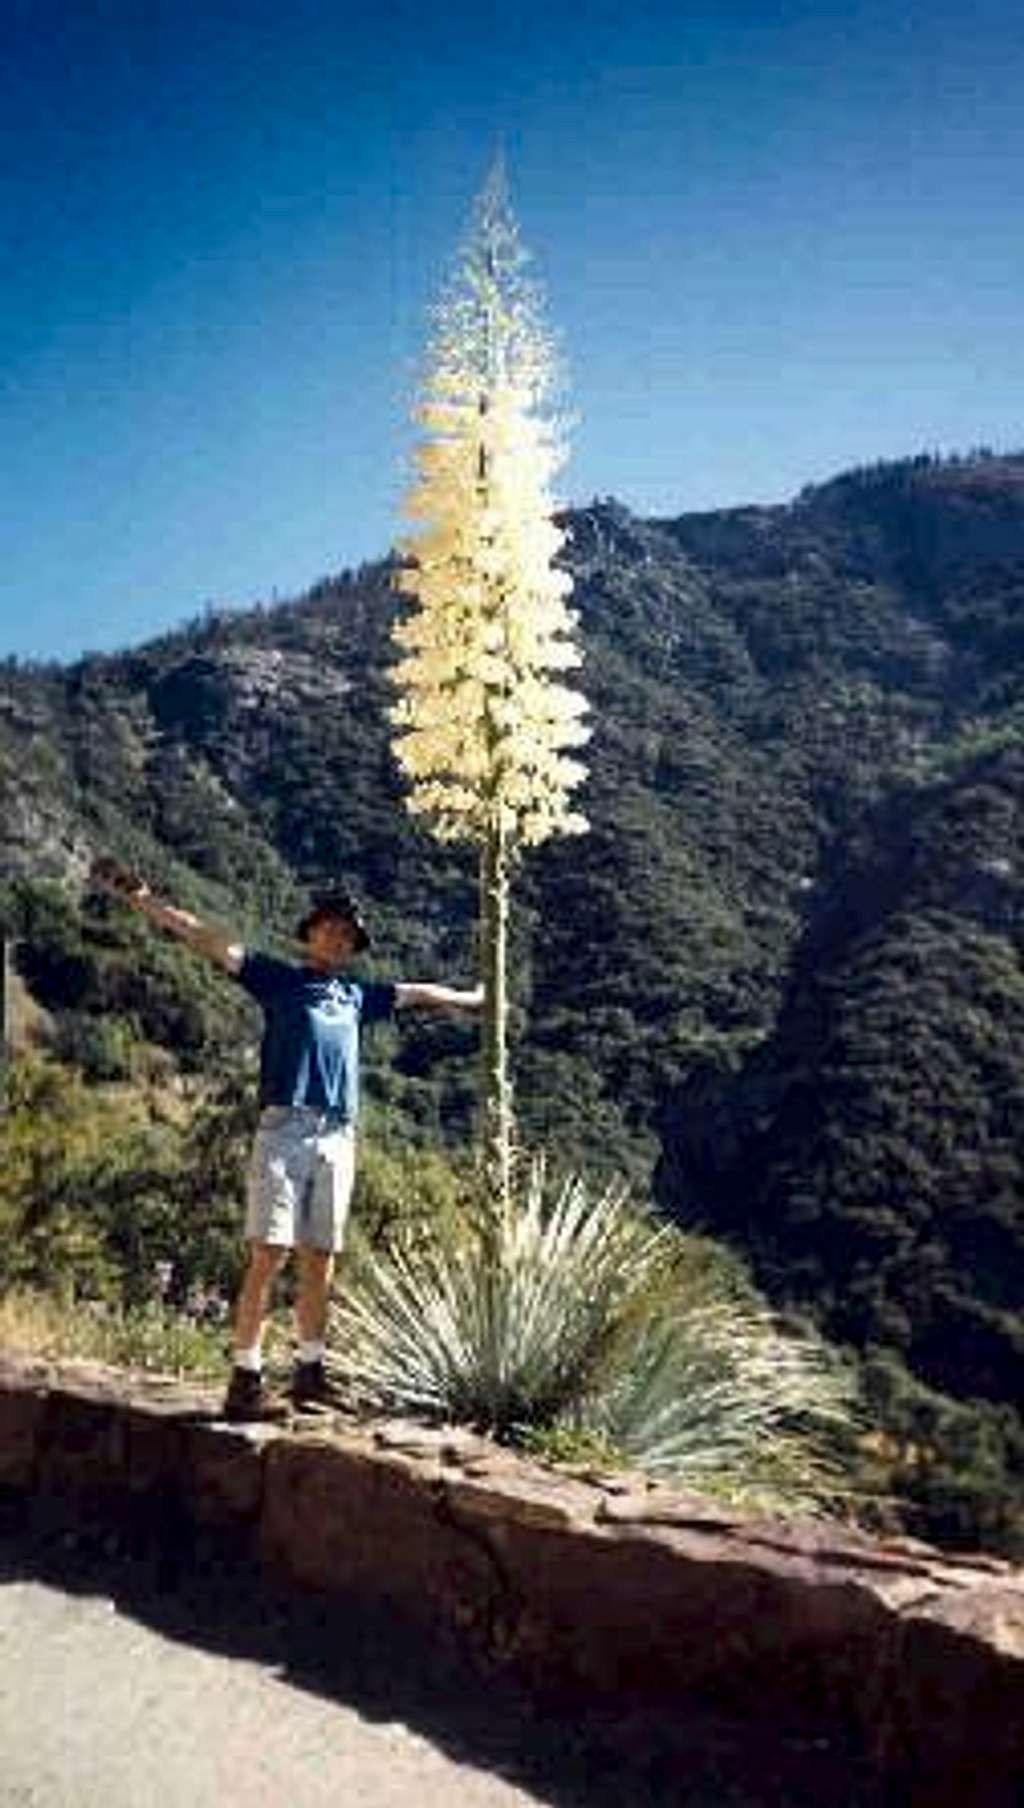 Yucca - the largest flower in the Sierra?